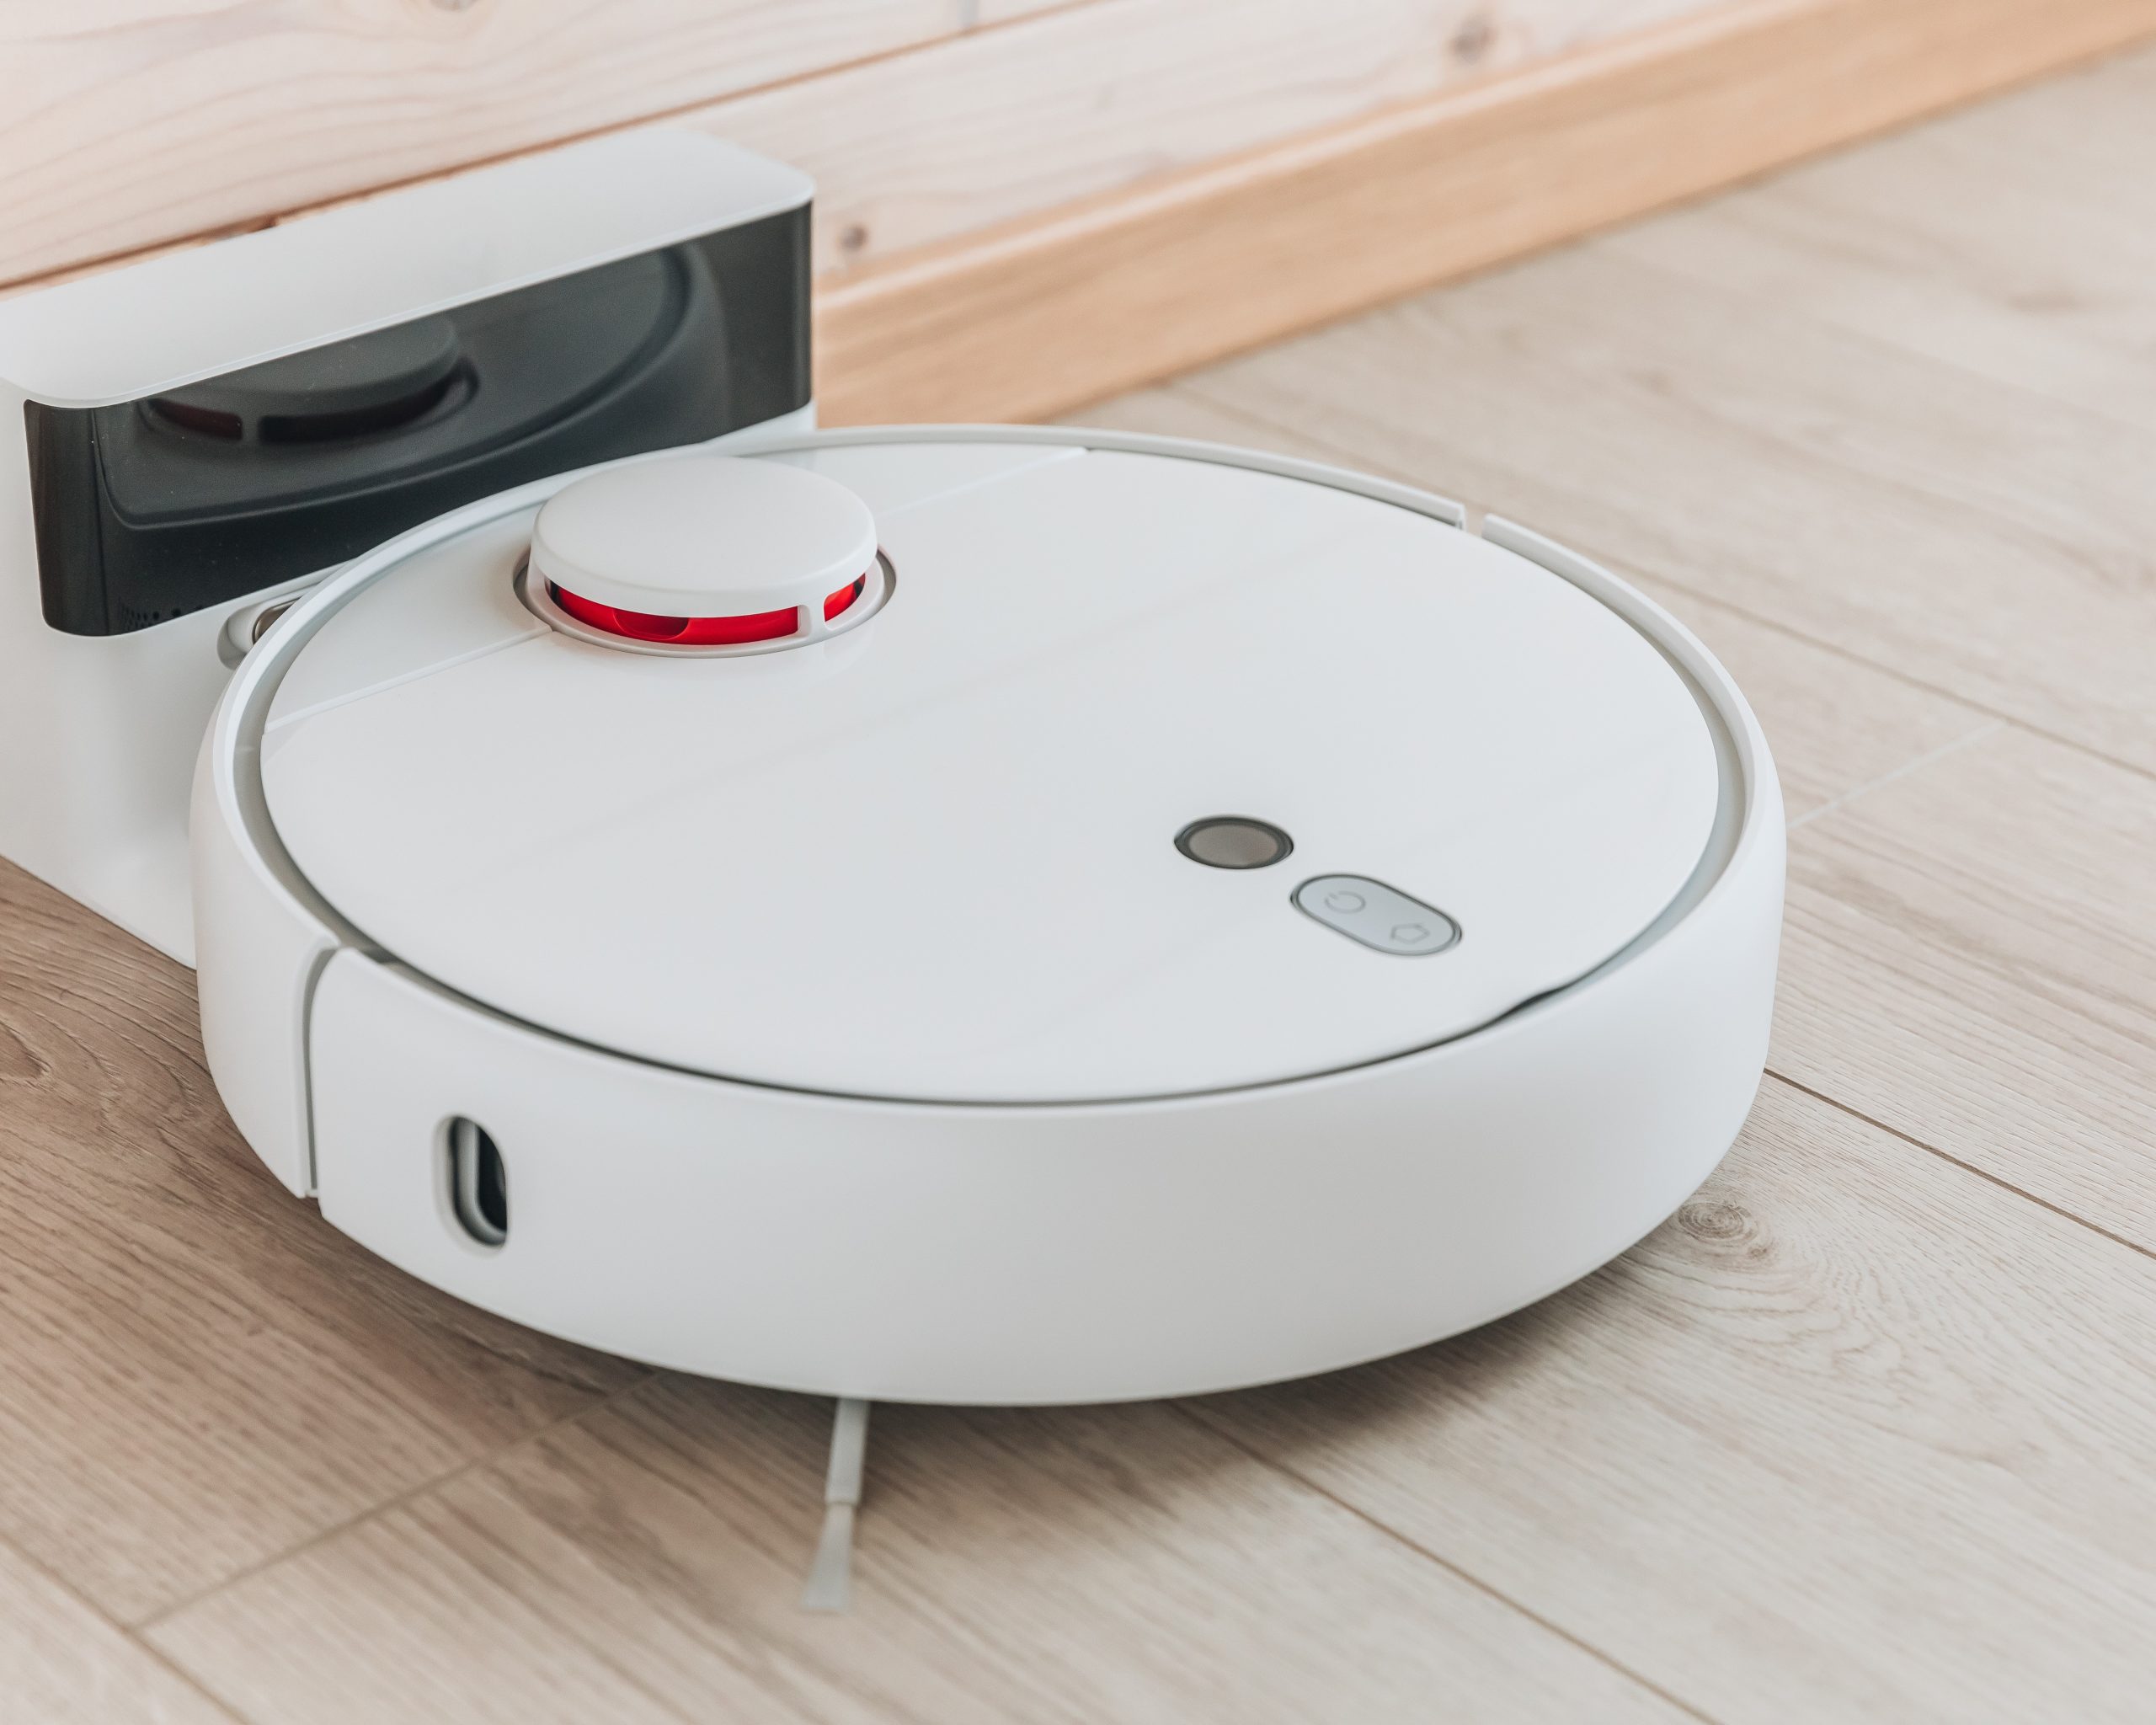 wireless robot vacuum cleaner return to charging a 2021 08 28 17 04 18 utc 1 scaled